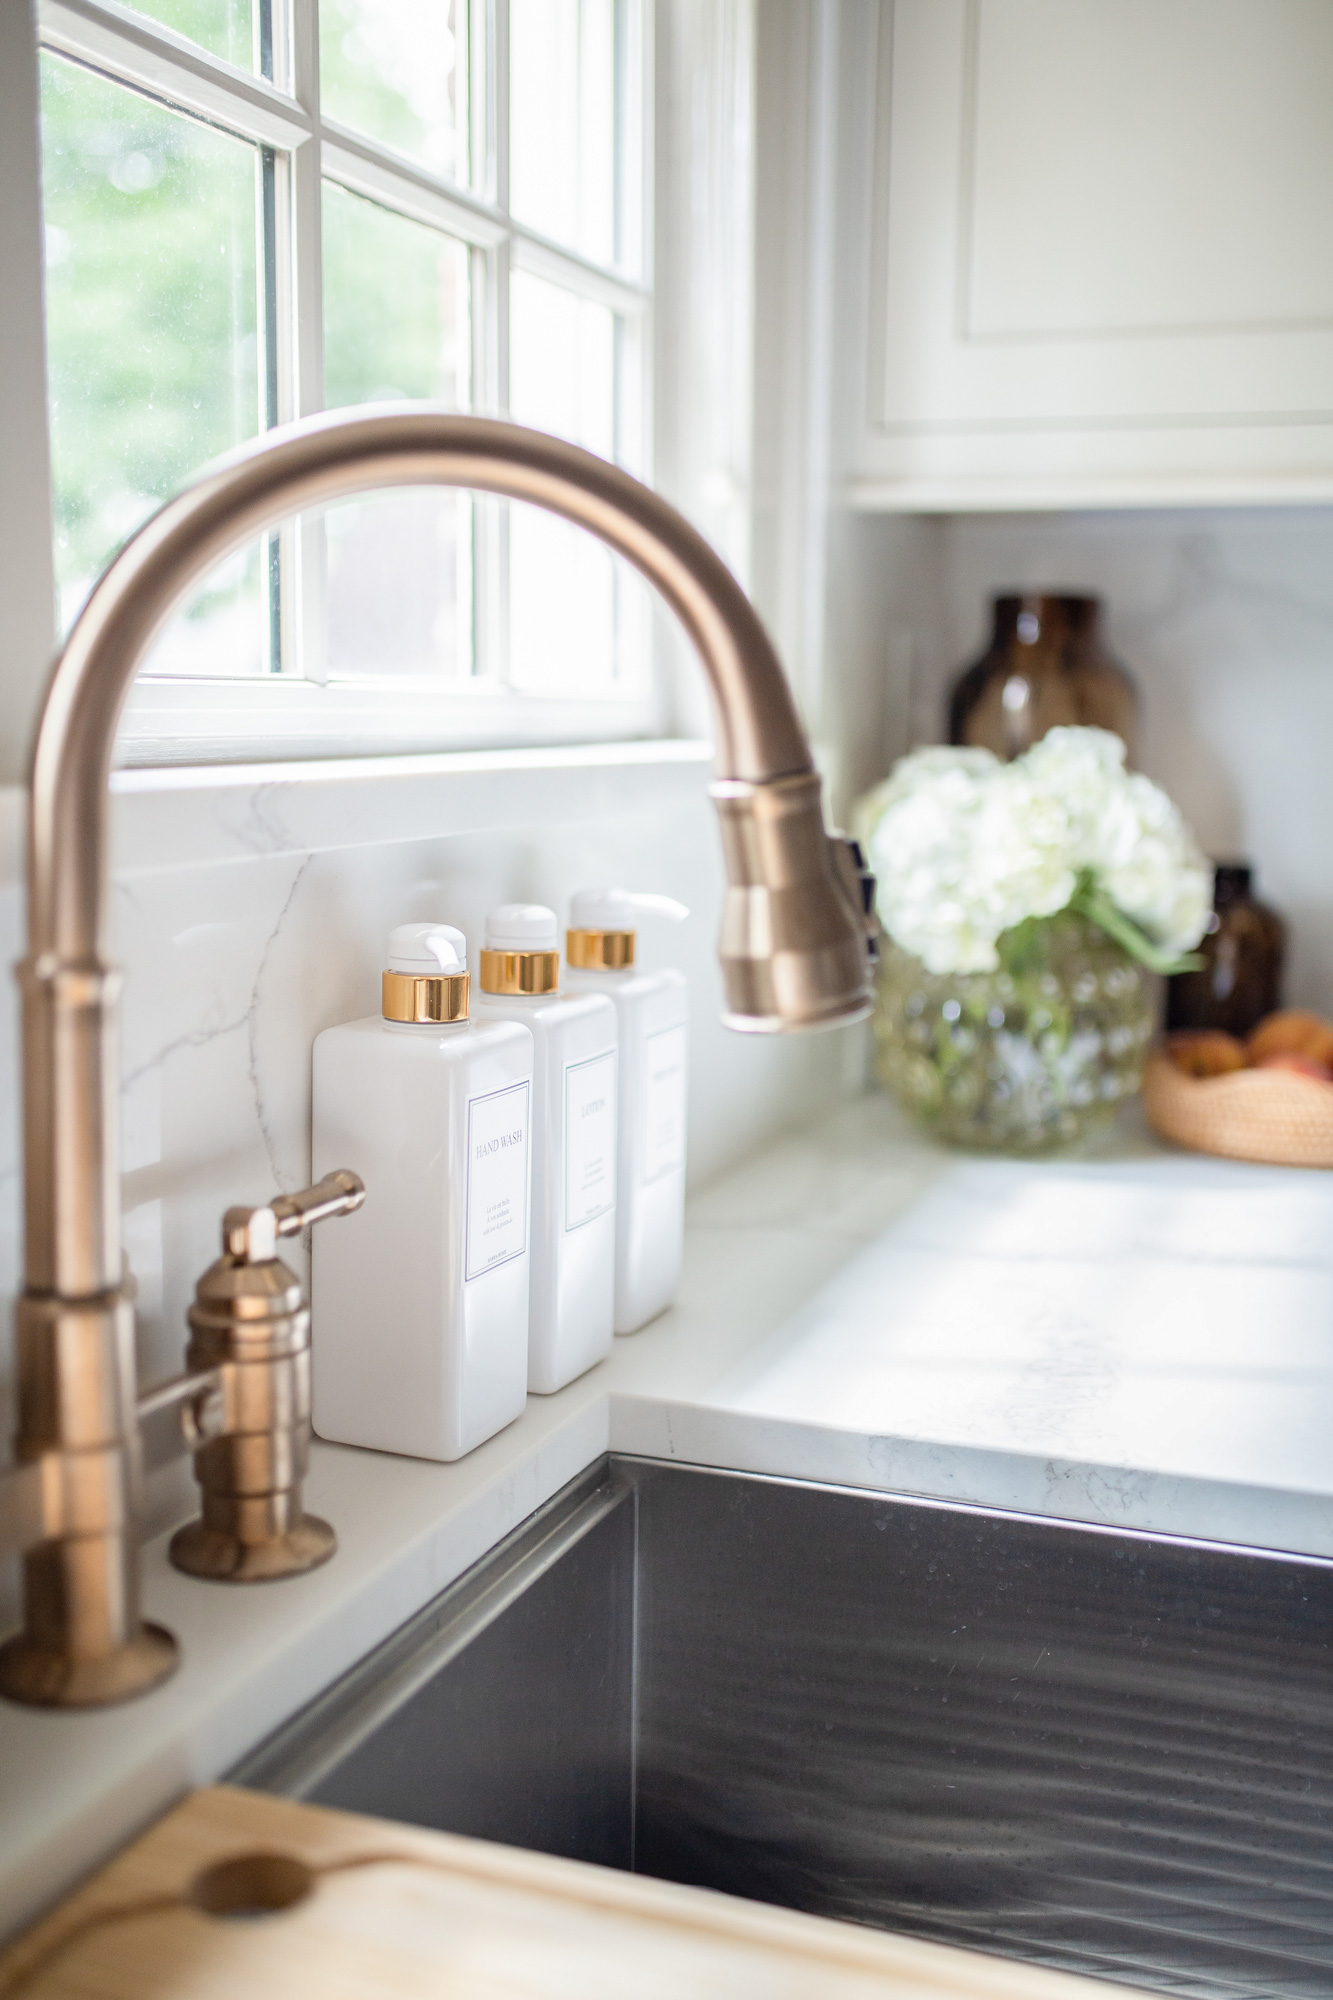 Delta Faucets / Glitter & Gingham